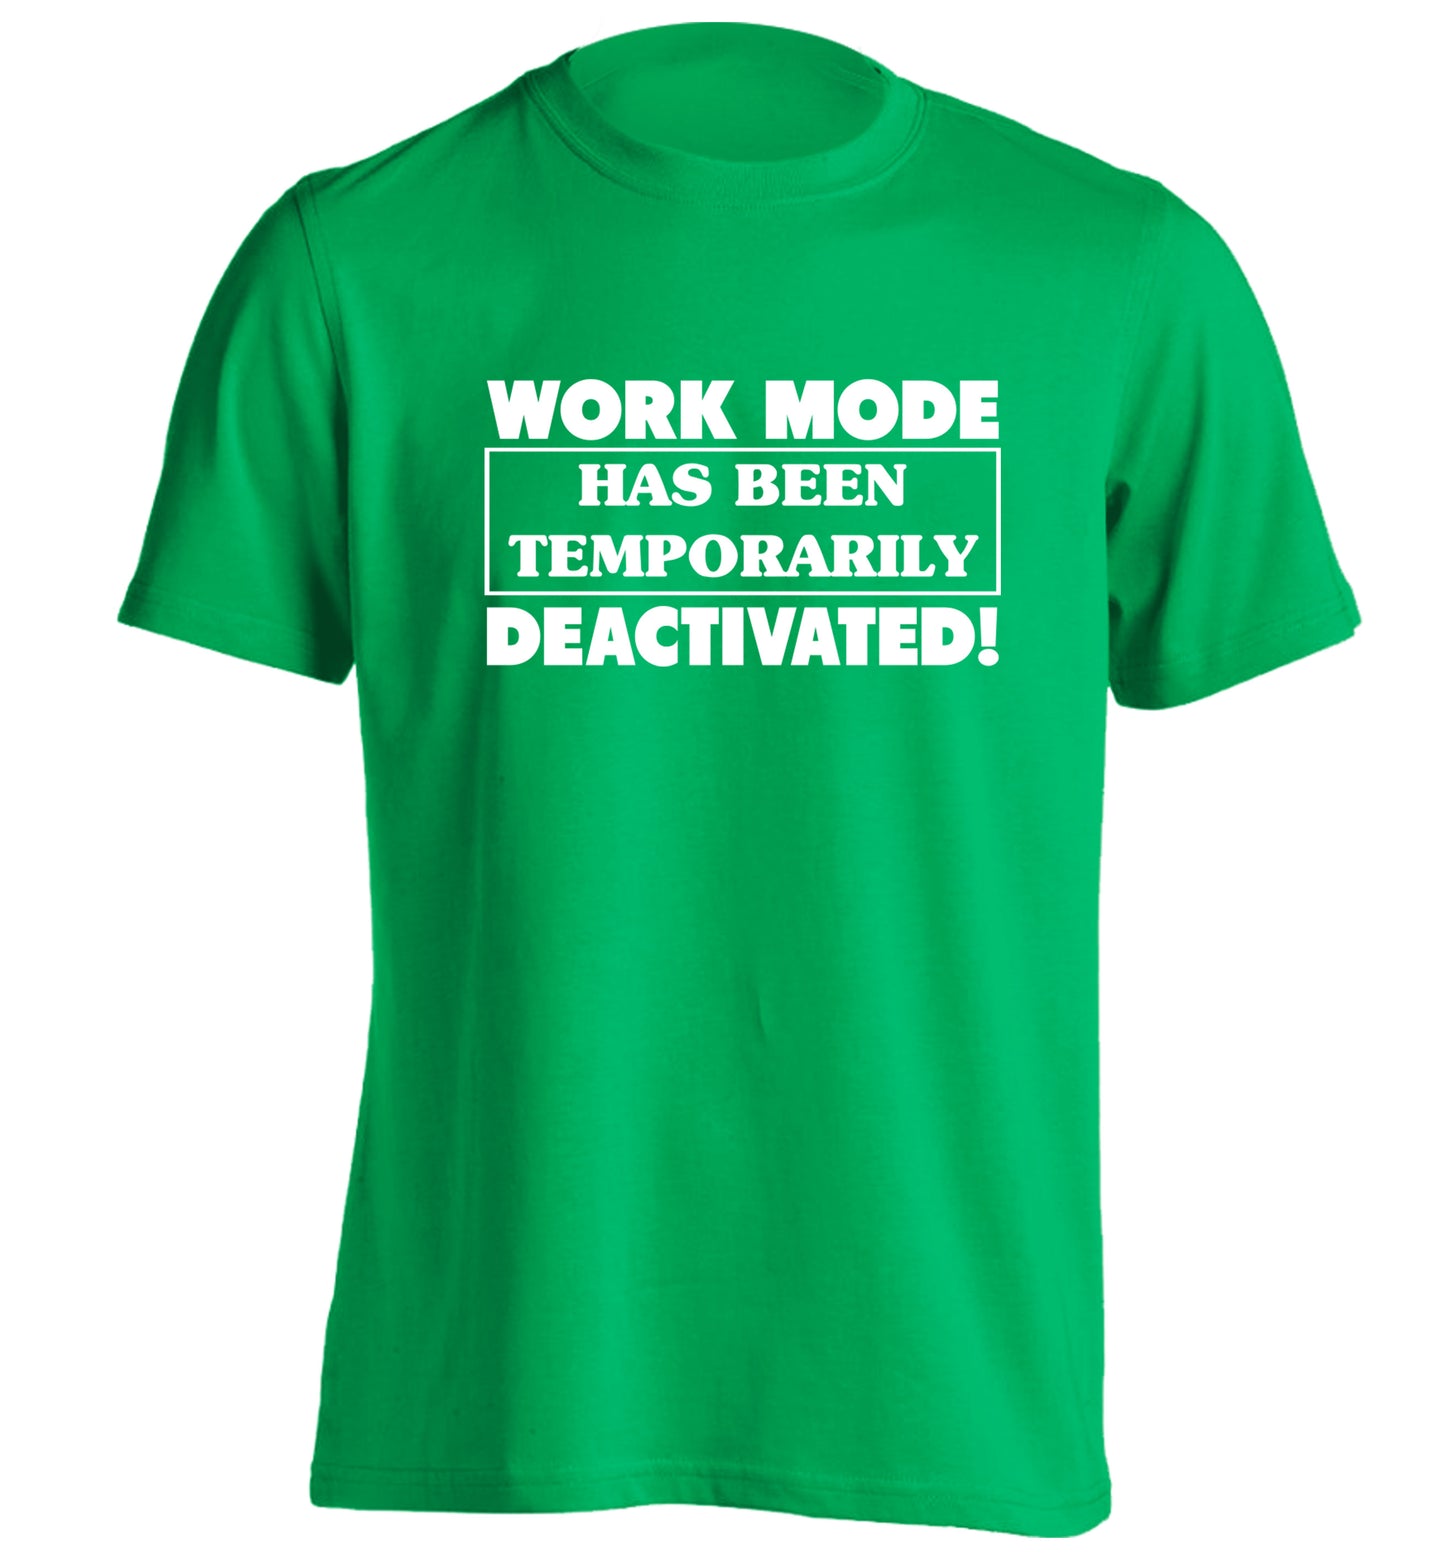 Work mode has now been temporarily deactivated adults unisex green Tshirt 2XL